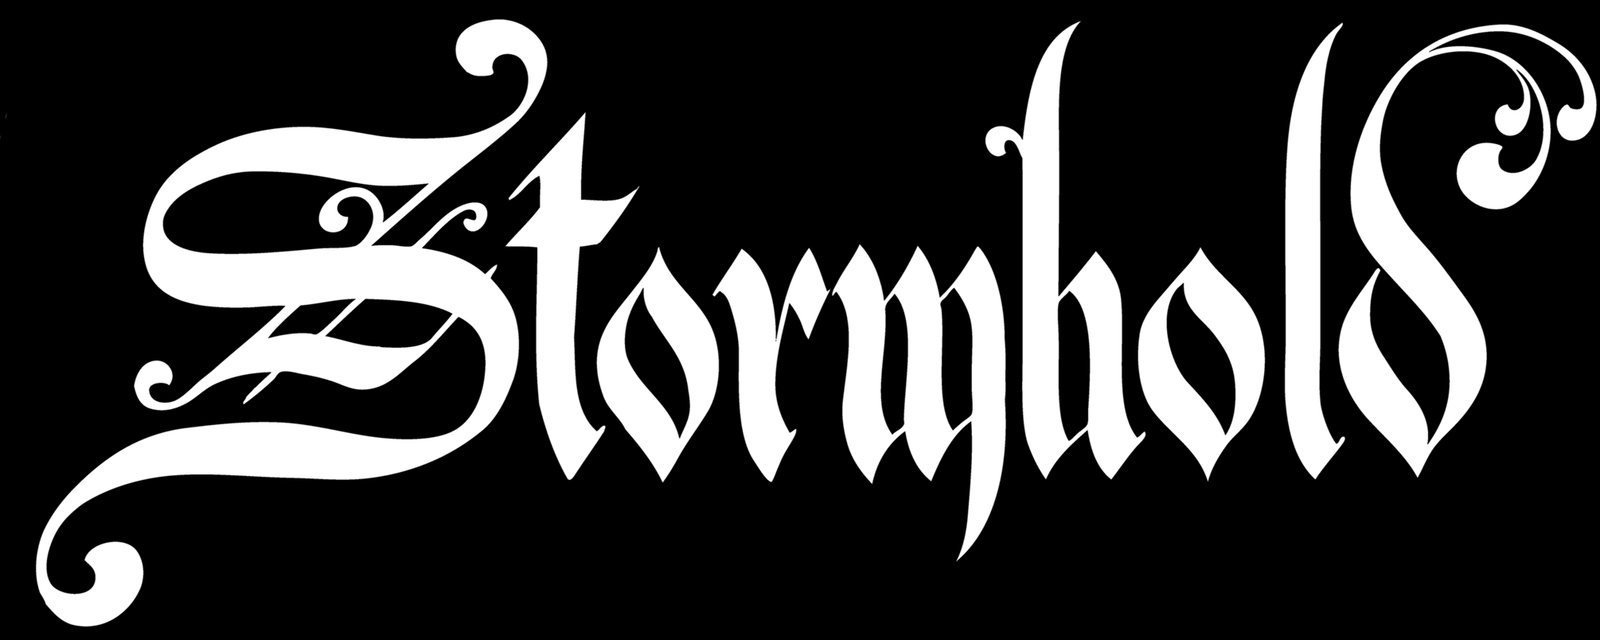 Stormhold